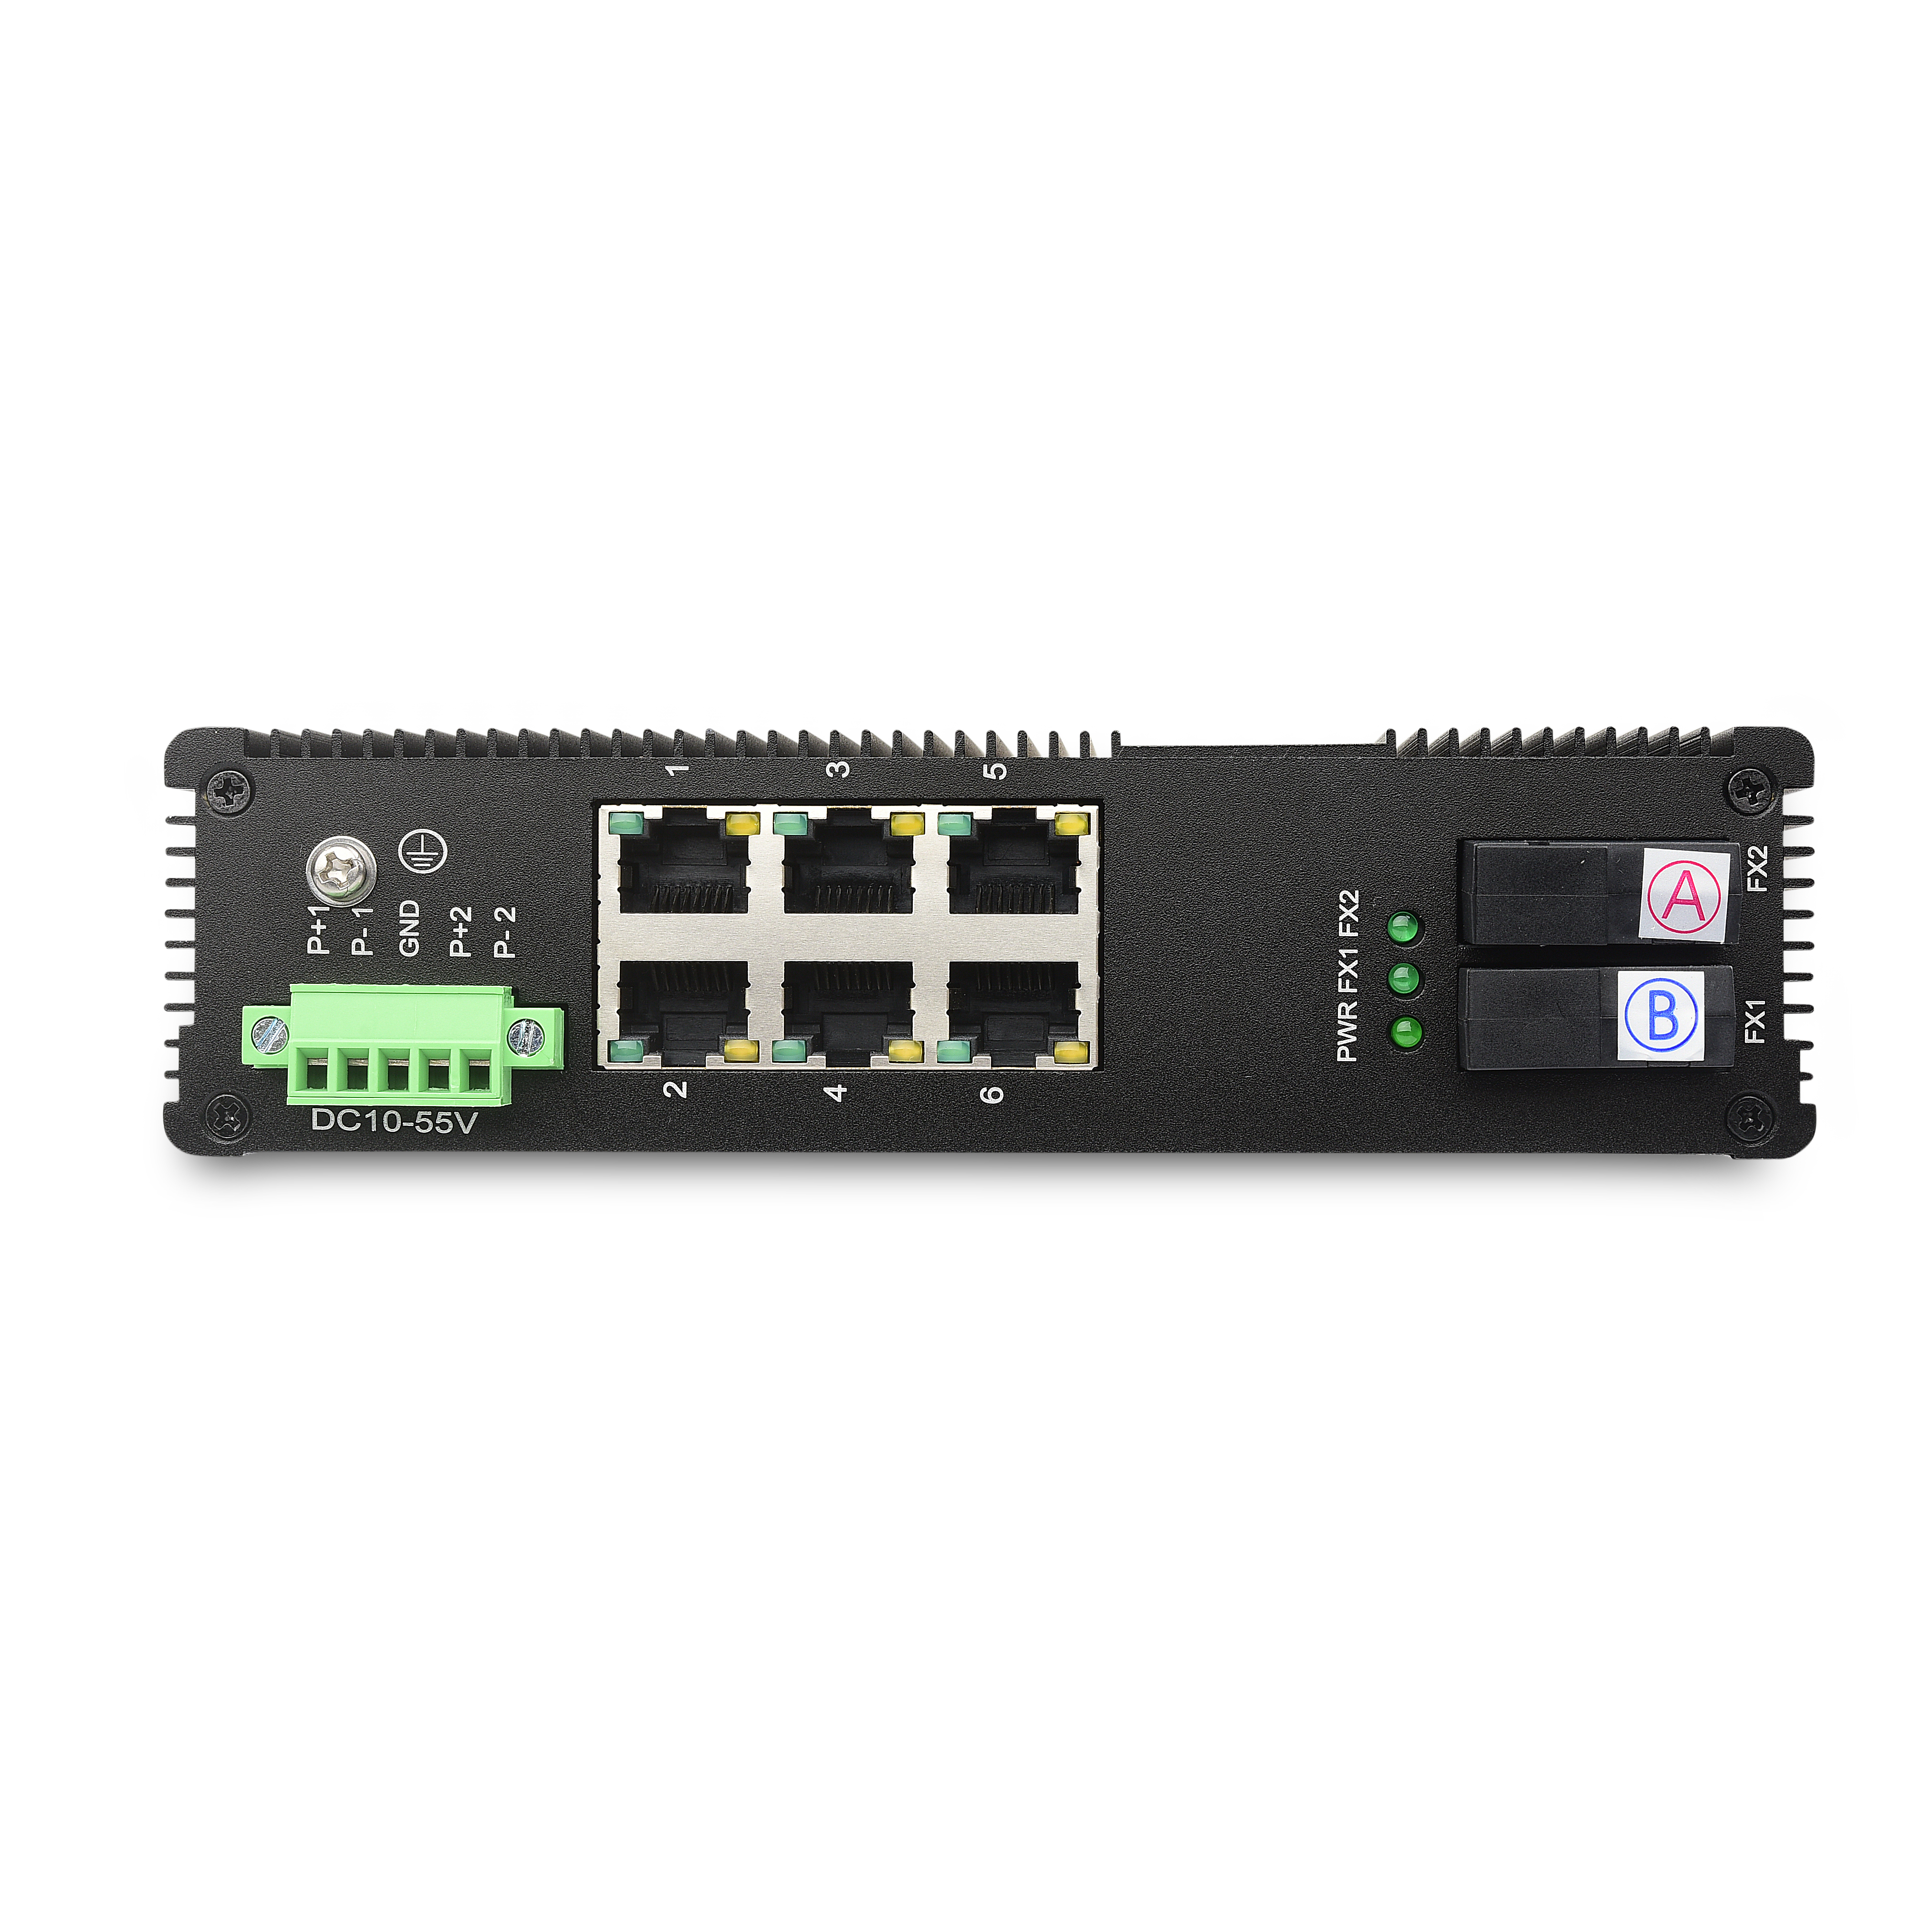 China Wholesale Gigabit Ethernet Unmanaged Quotes Manufacturer - 6 10/100TX PoE/PoE+ and 2 100FX | Unmanaged Industrial PoE Switch JHA-IF26HP  – JHA